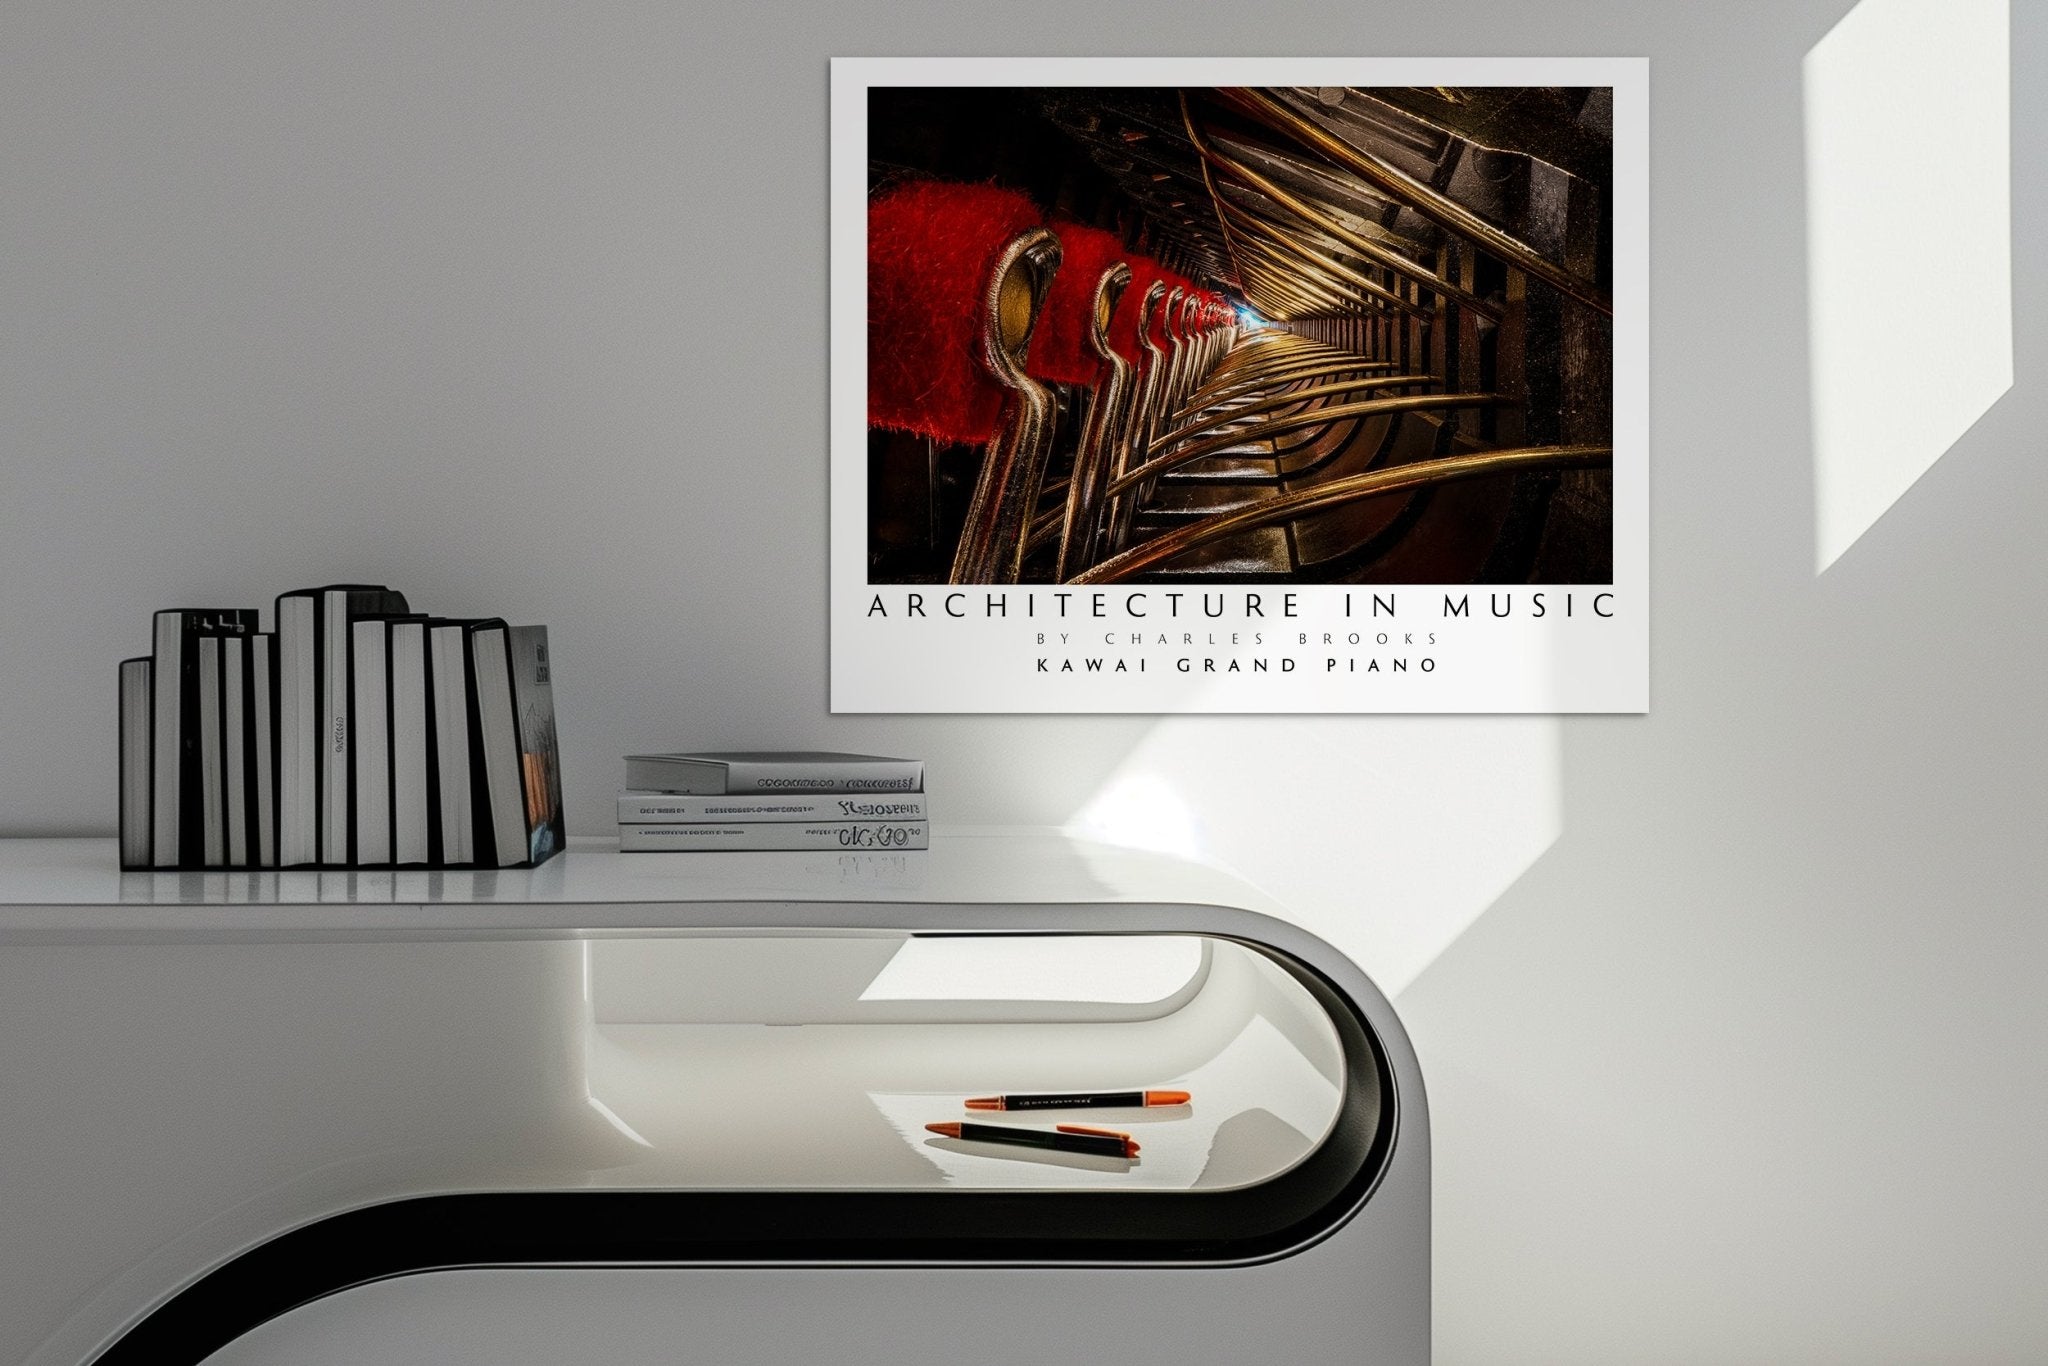 Photo of Kawai Grand Piano Part 1. High Quality Poster. - Giclée Poster Print - Architecture In Music